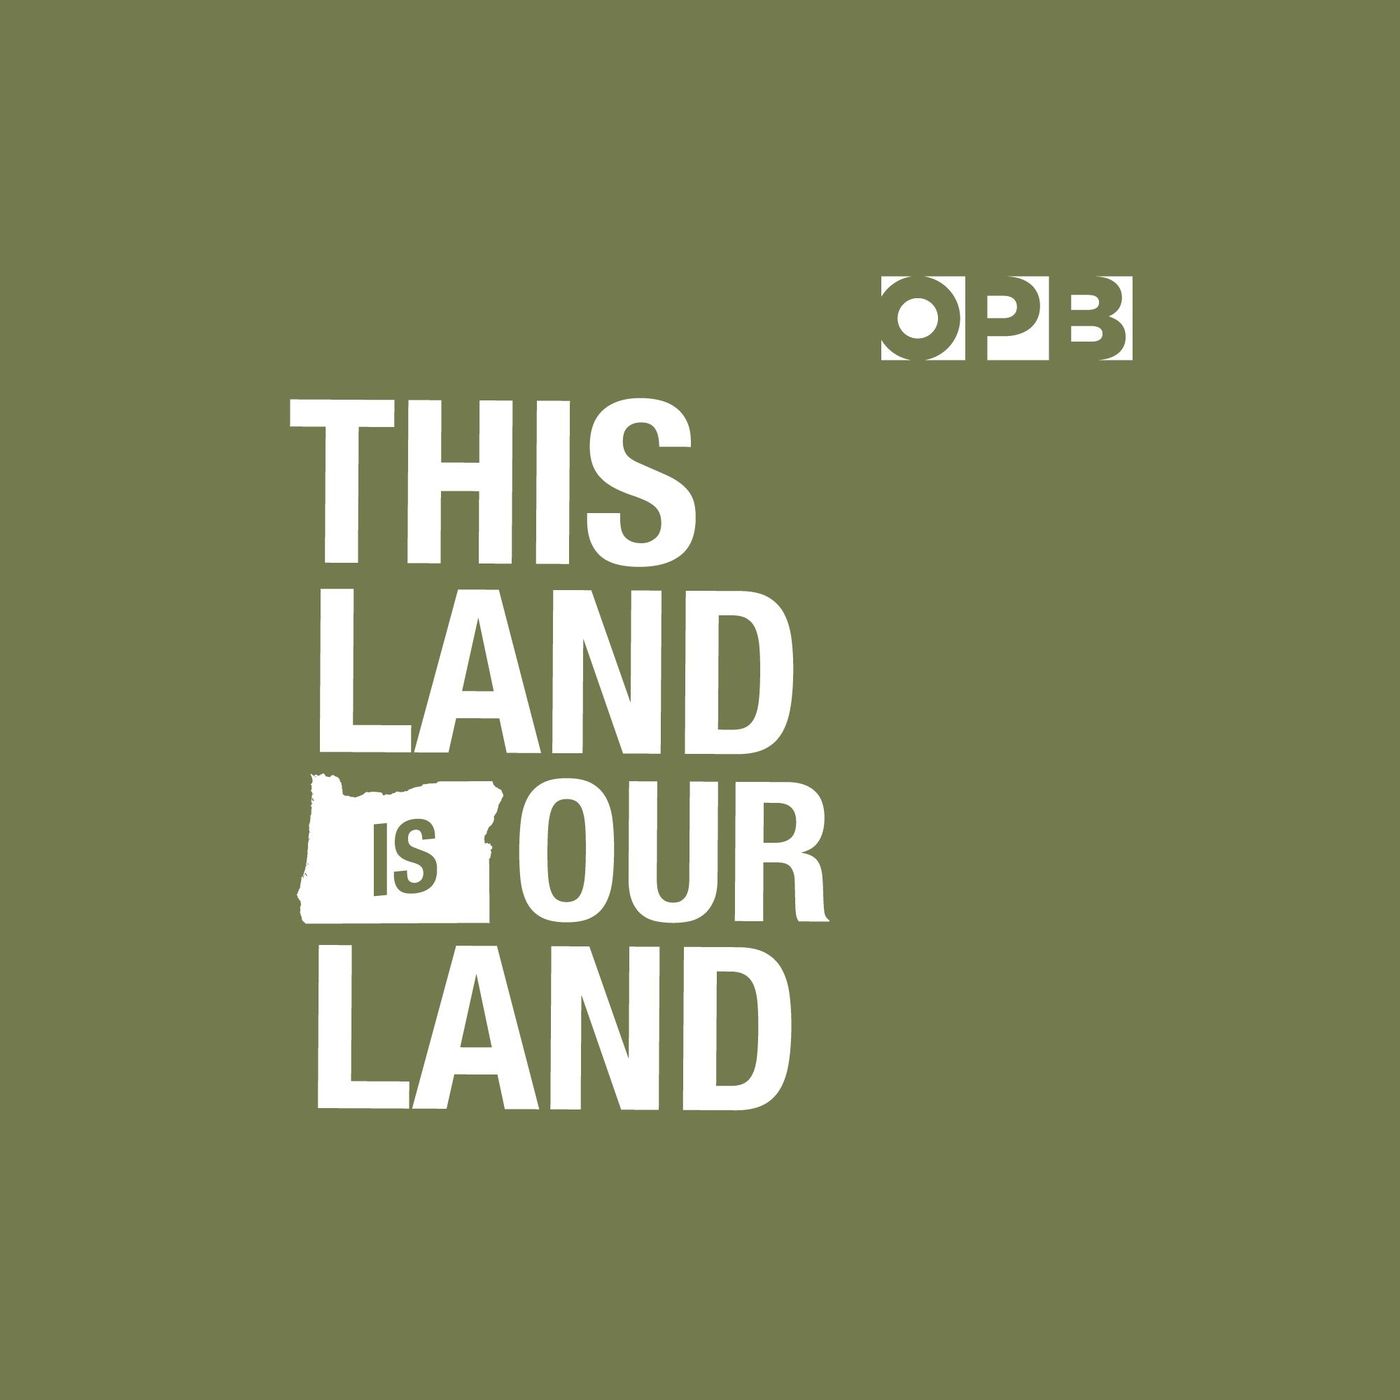 OPB’s This Land is Our Land